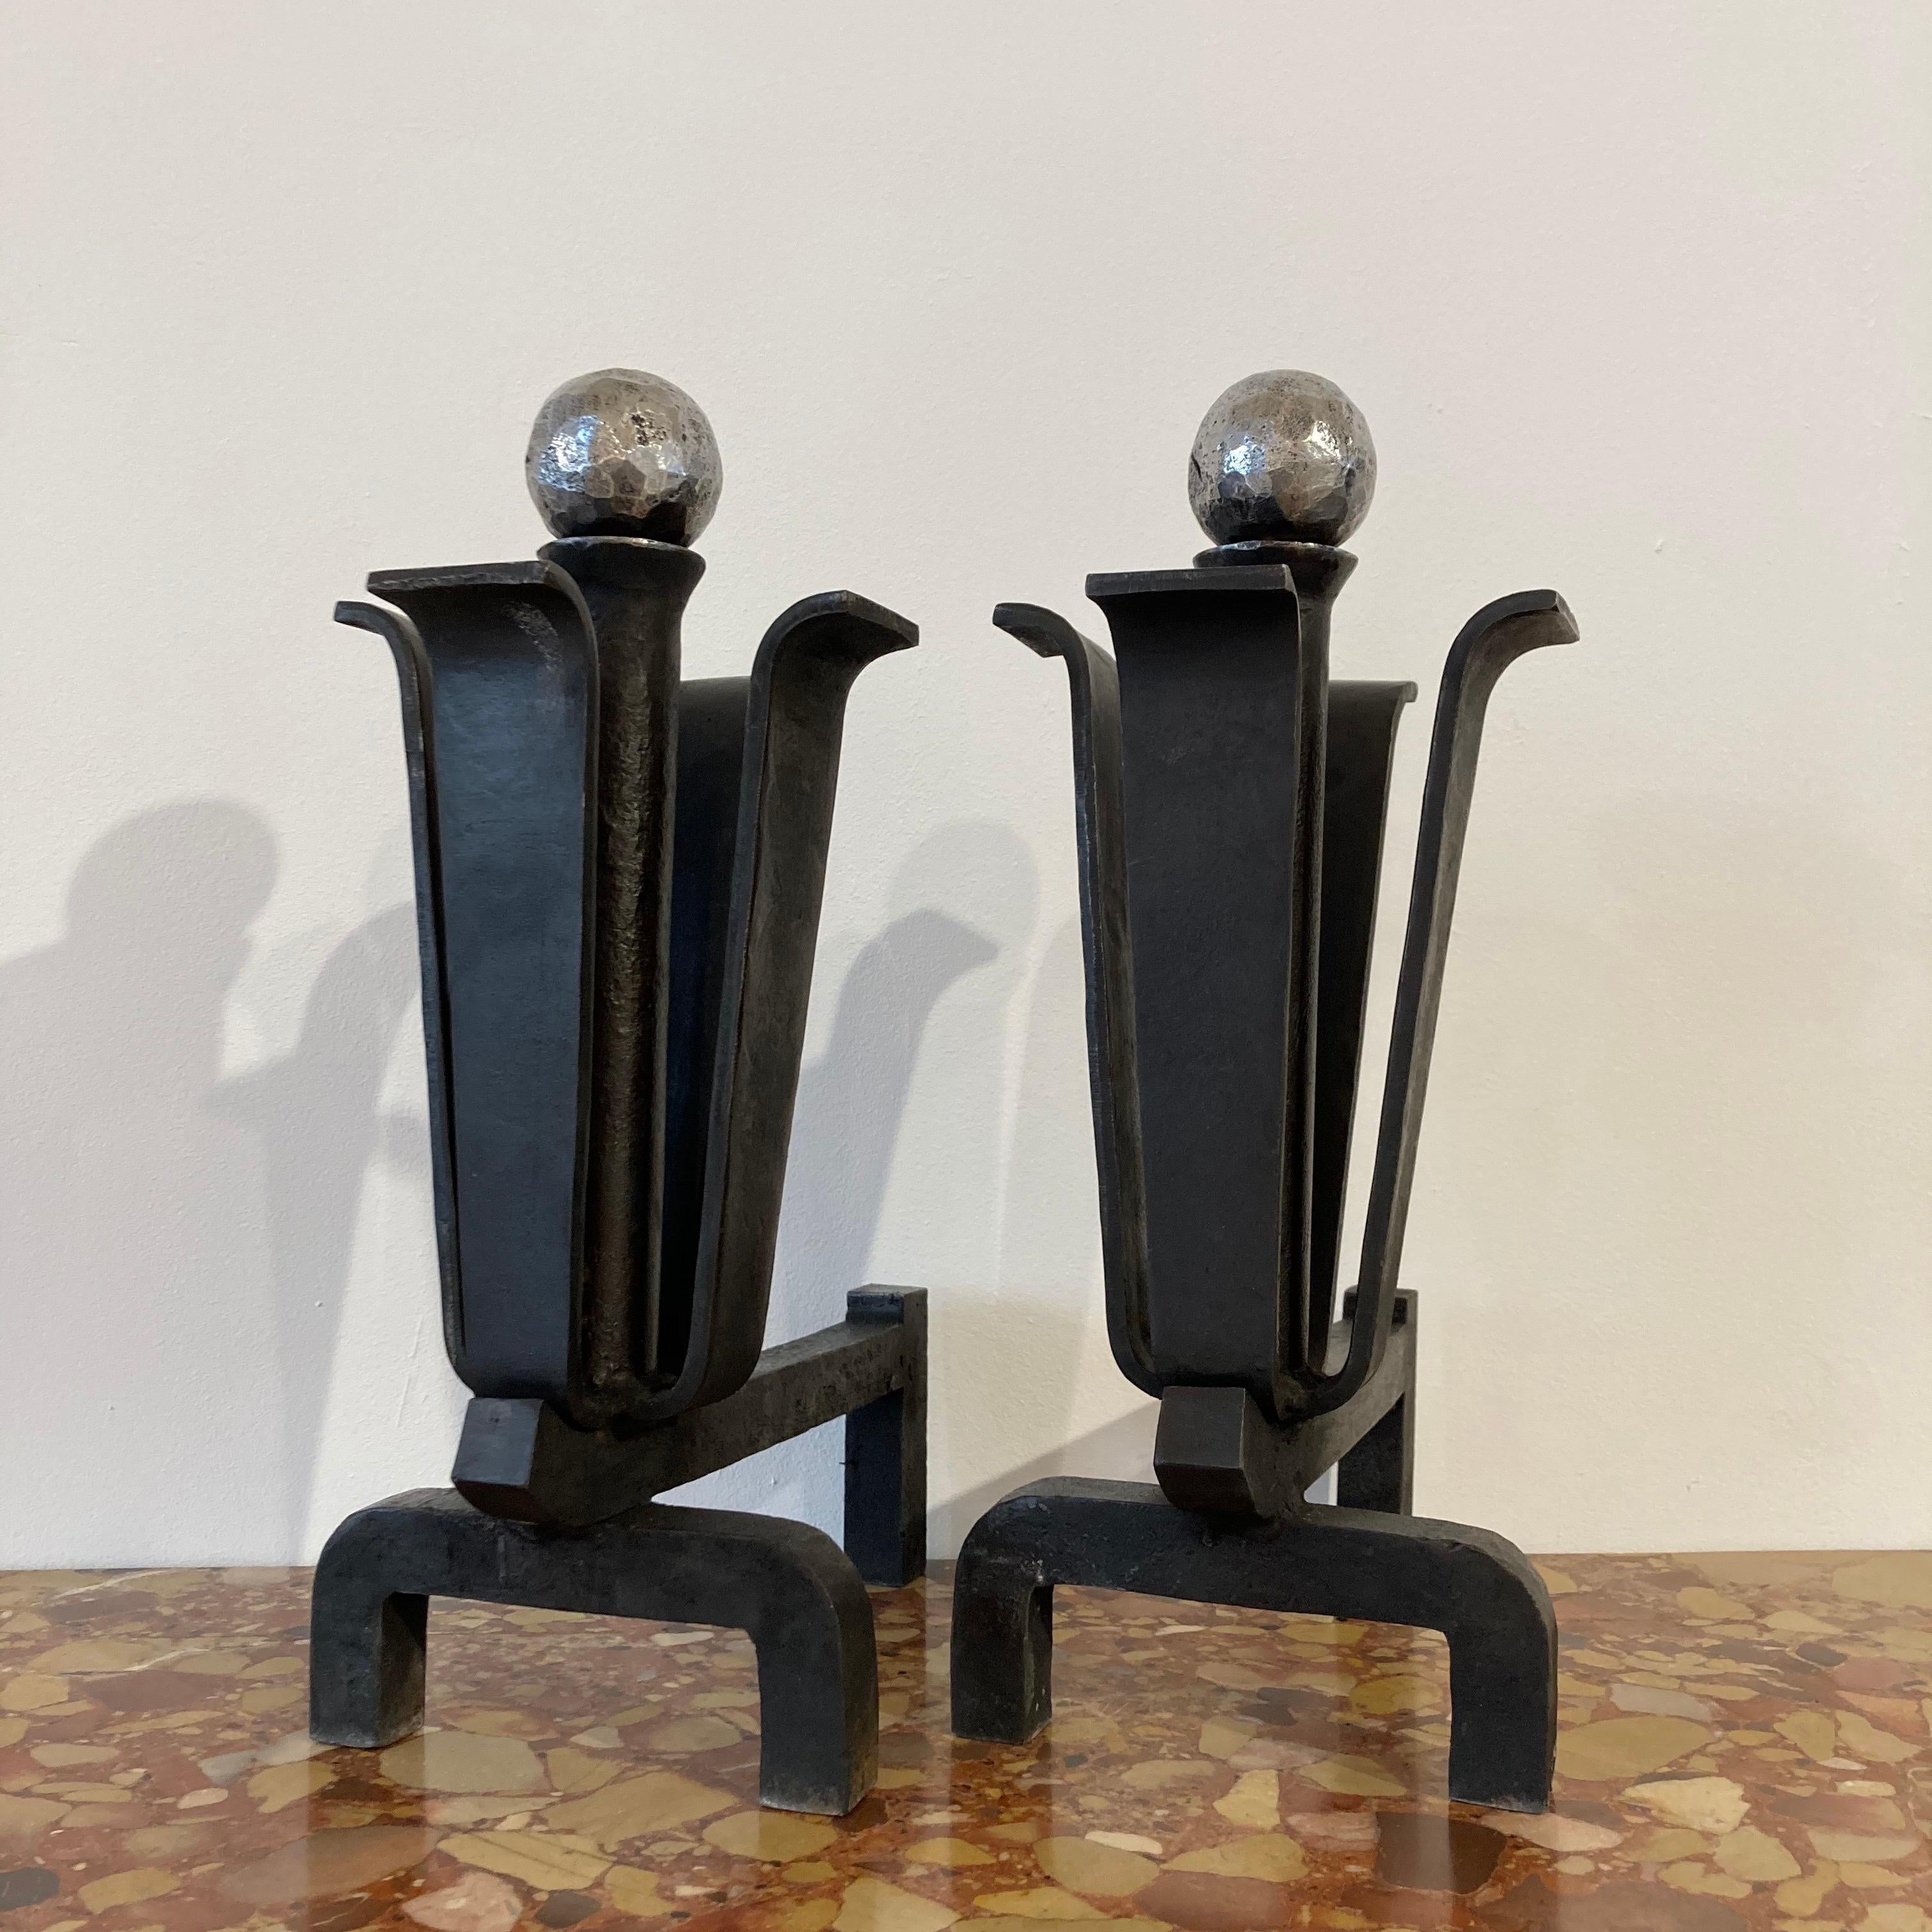 Lovely pair of Mid-Century Modern andirons.
Inspired by an opening flower, these heavy wrought iron andirons open up to reveal a polished hand hammered 